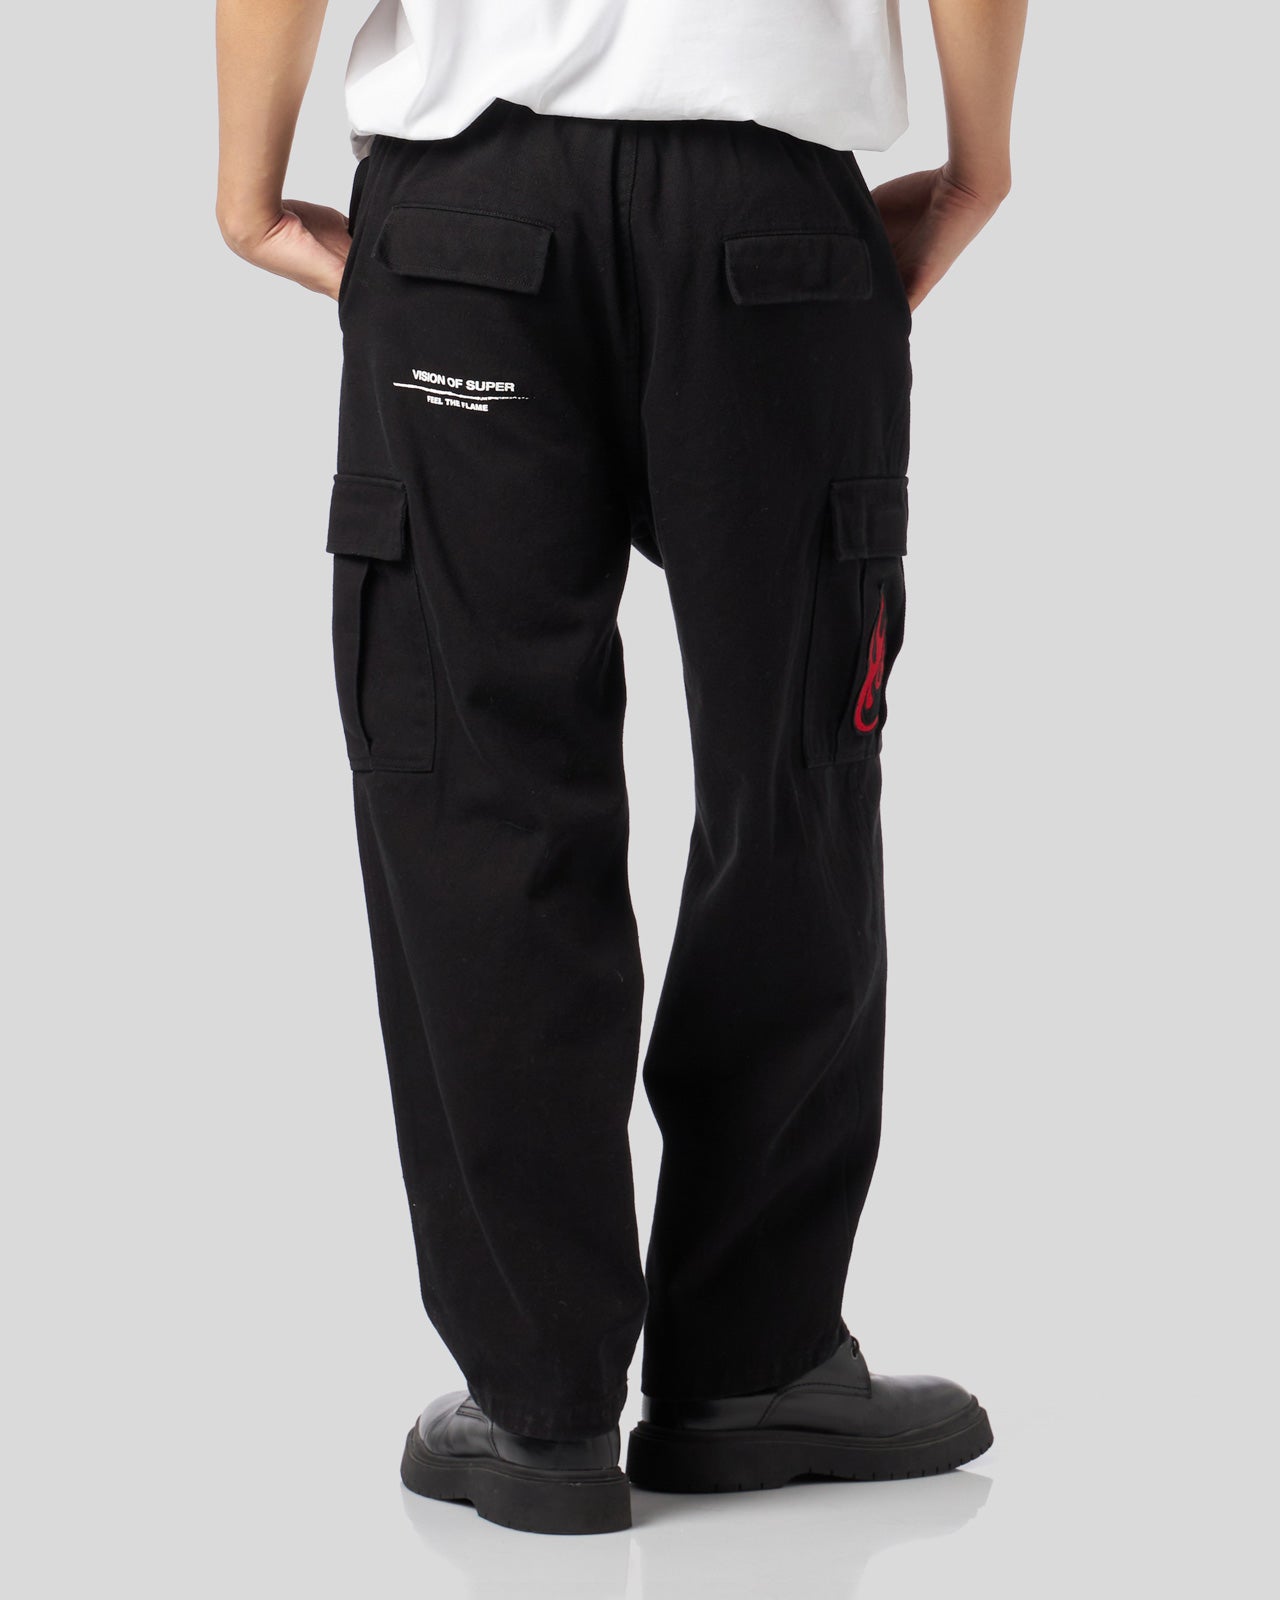 BLACK CARGO PANTS WITH FLAMES LOGO PATCH AND PRINTED LOGO